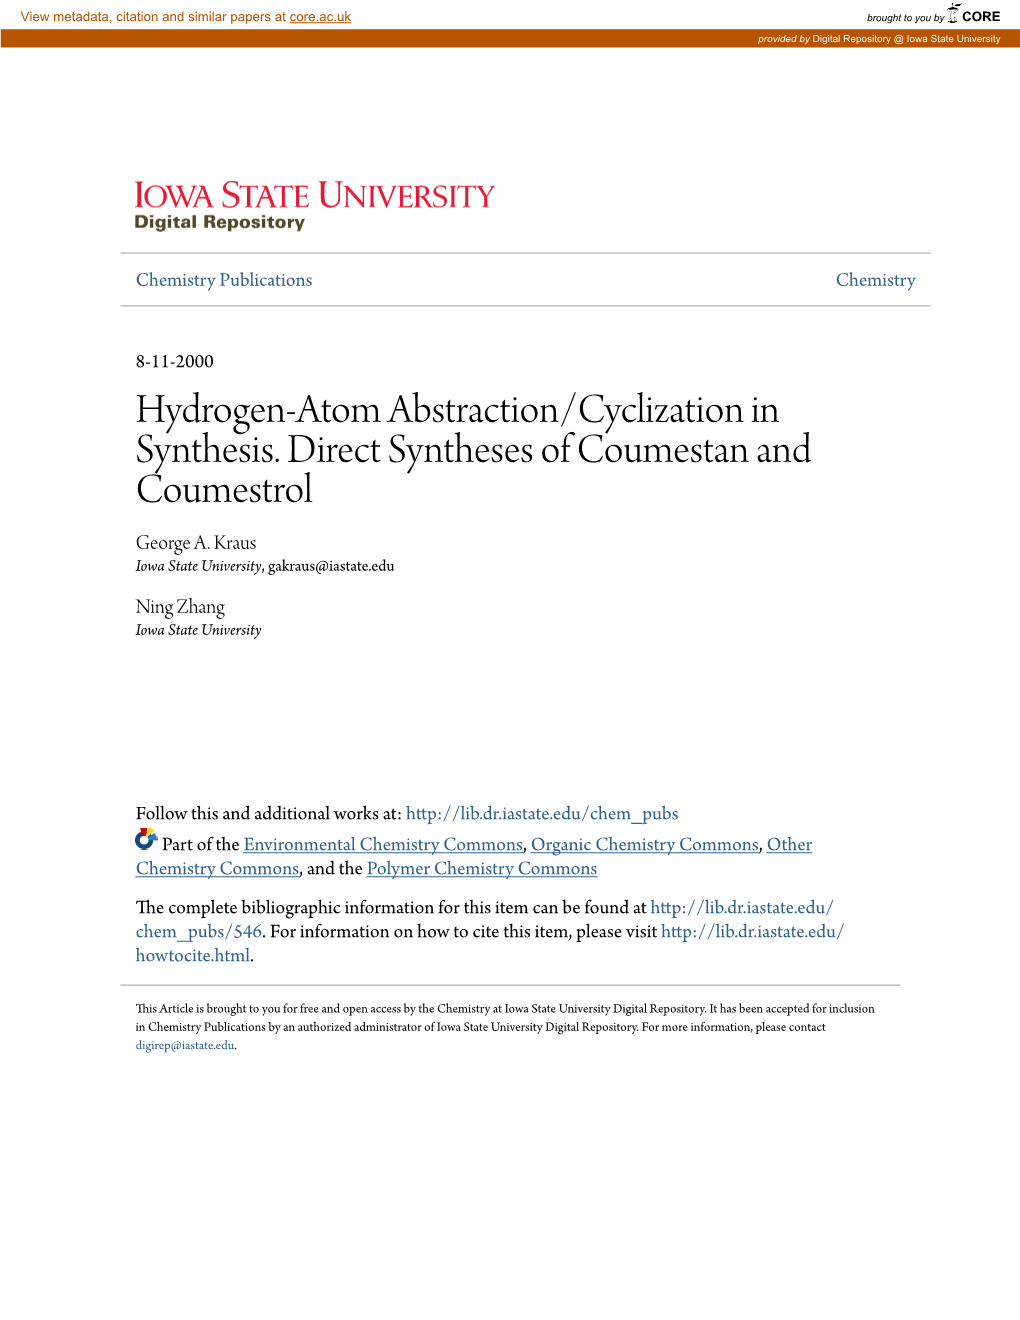 Hydrogen-Atom Abstraction/Cyclization in Synthesis